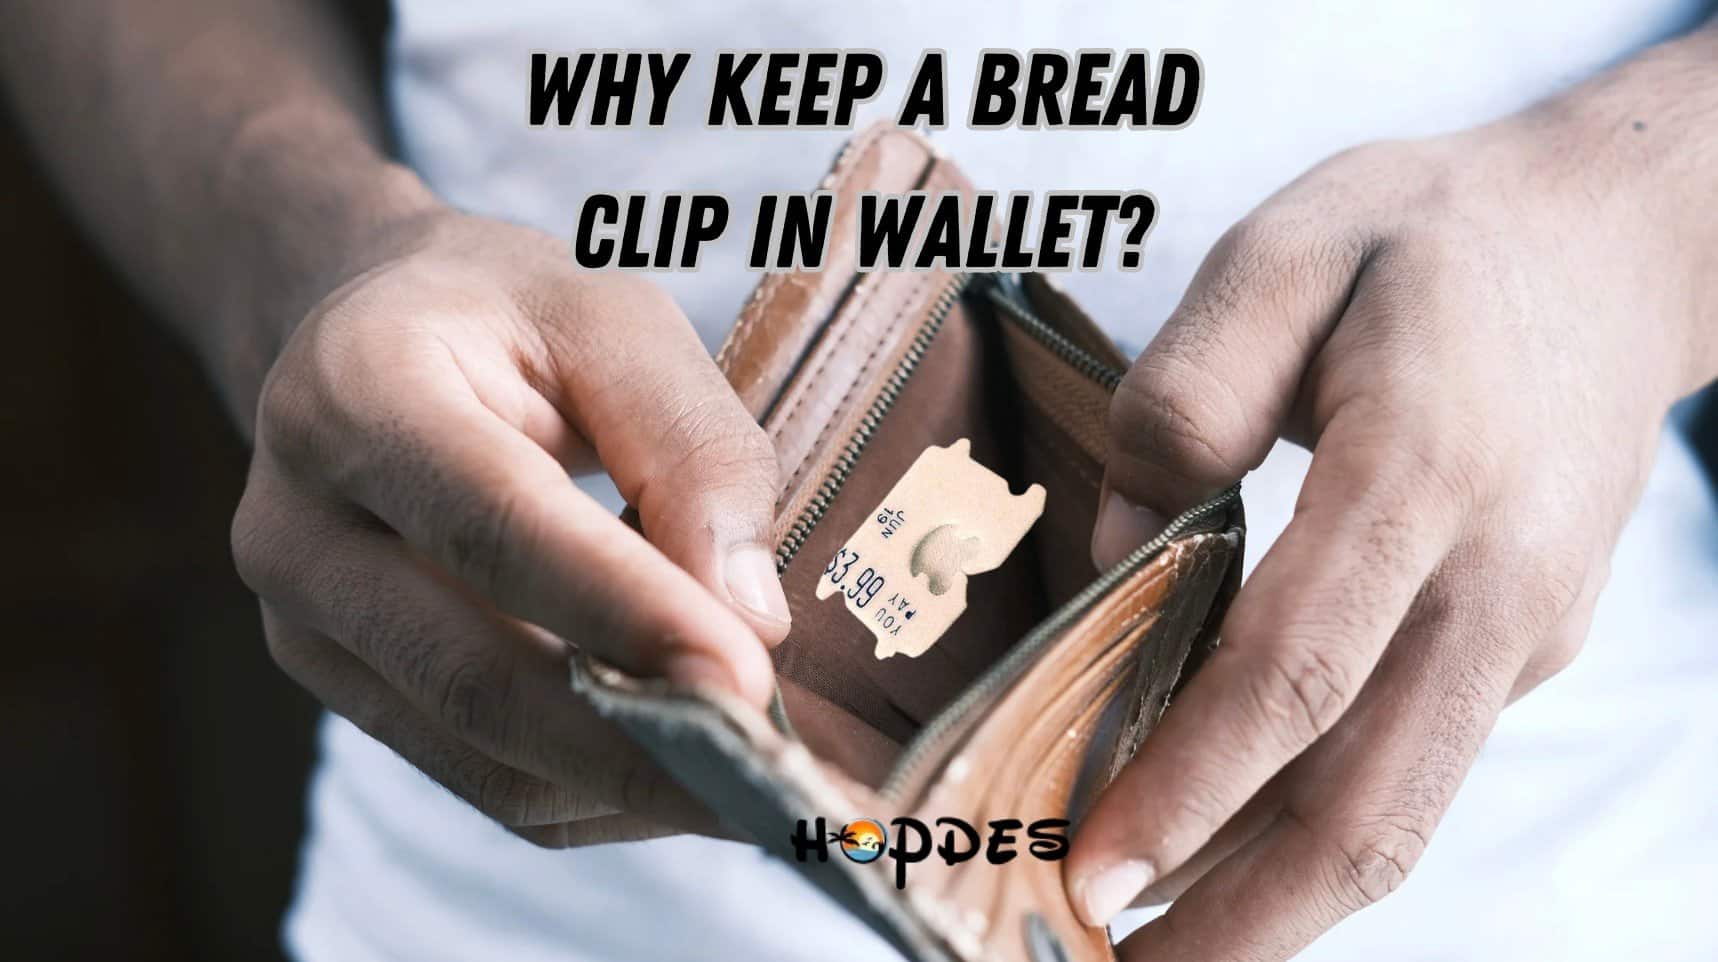 Travel Smarter: Unexpected Reasons Why You Should Carry a Bread Clip on Your Next Adventure